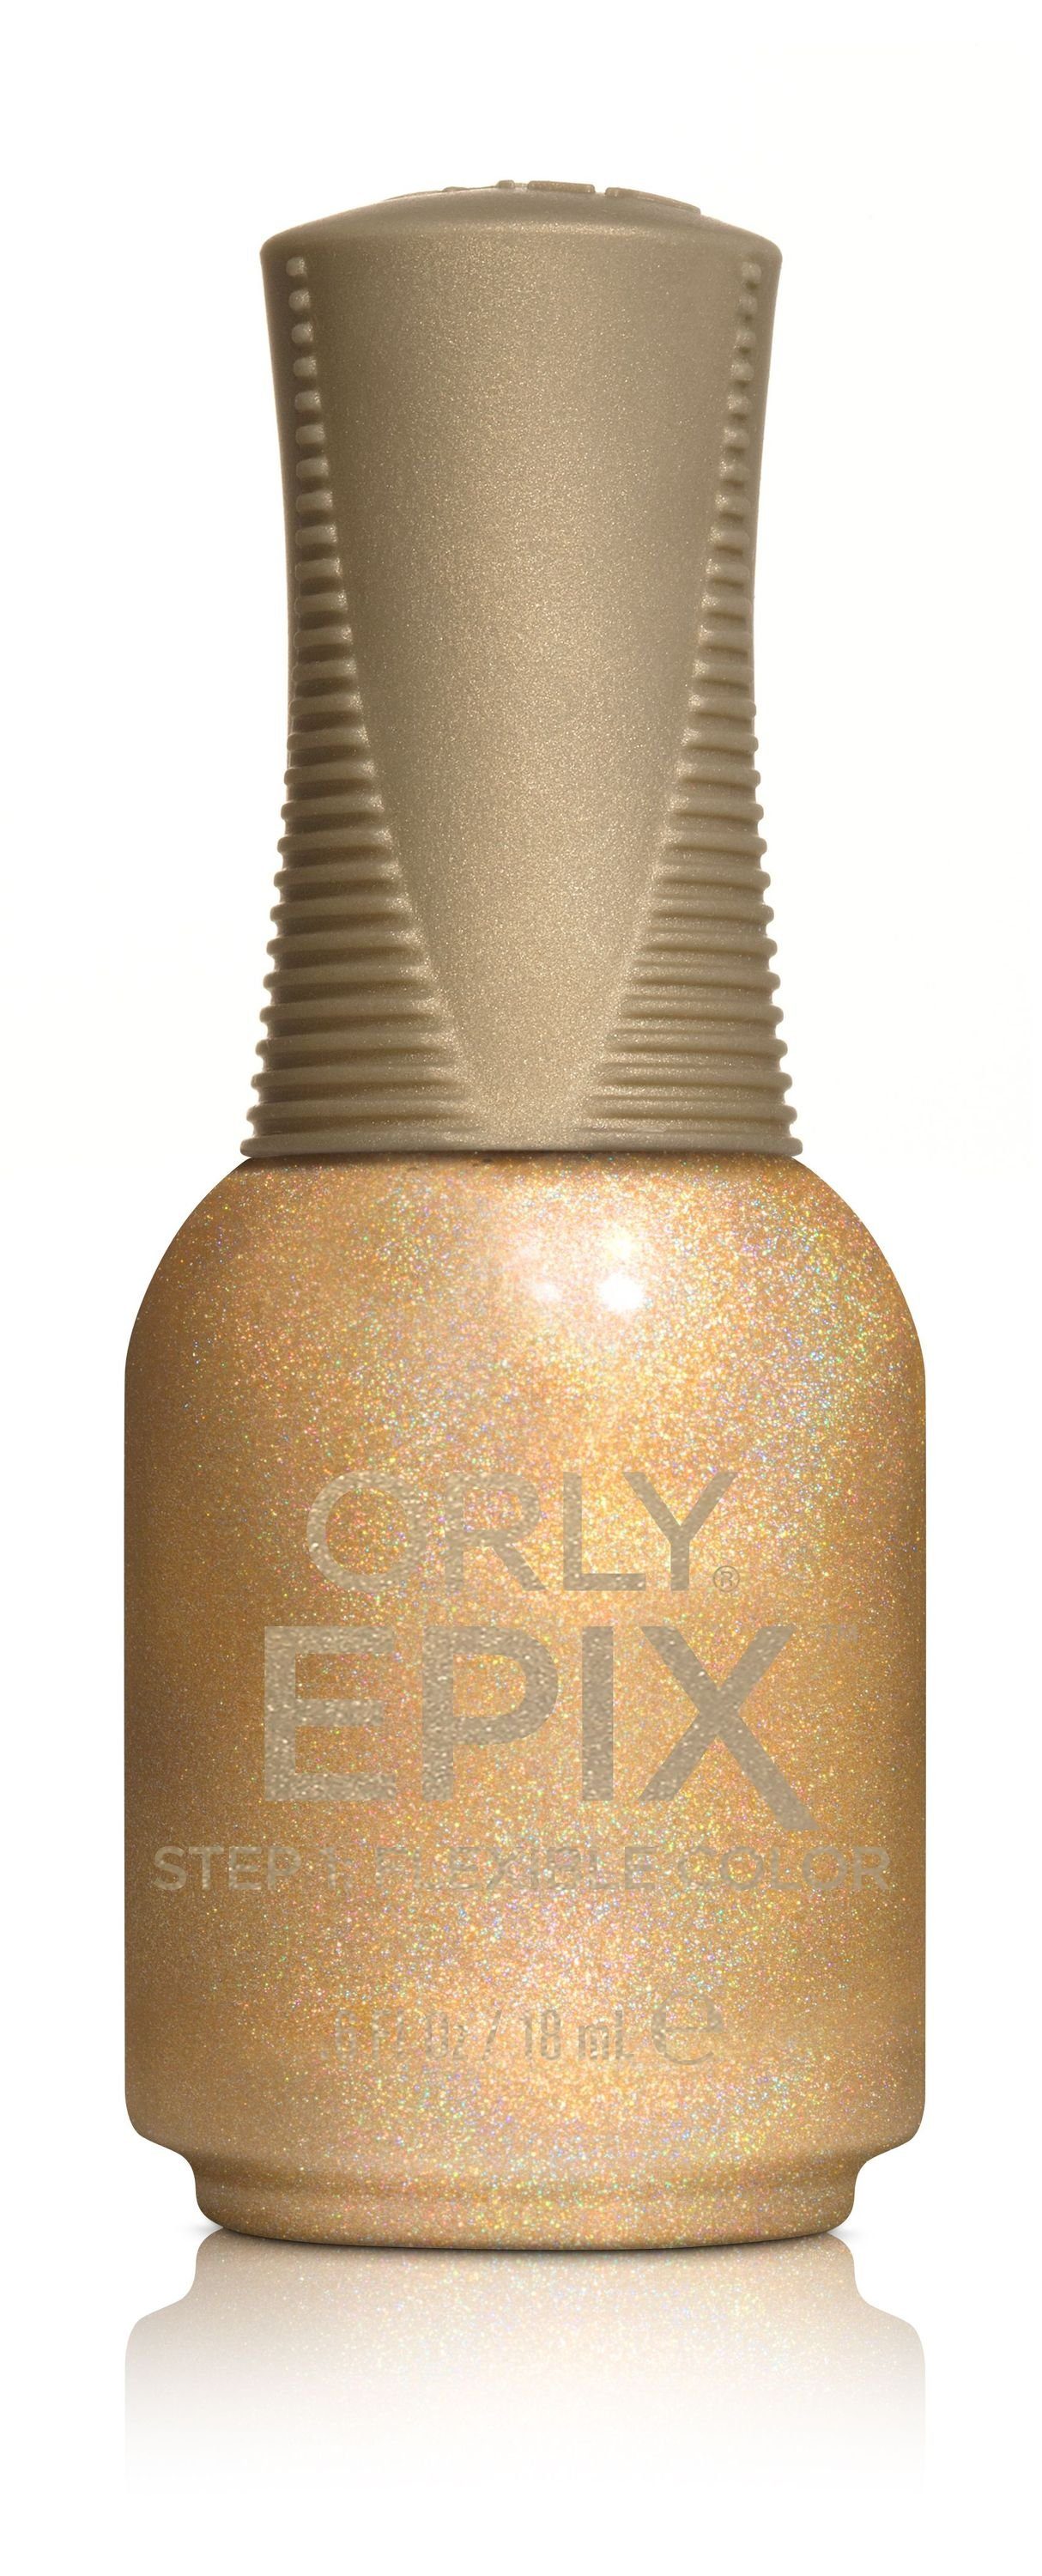 - Nagellack EPIX Effects, Color ORLY ML - ORLY 18 Special Flexible